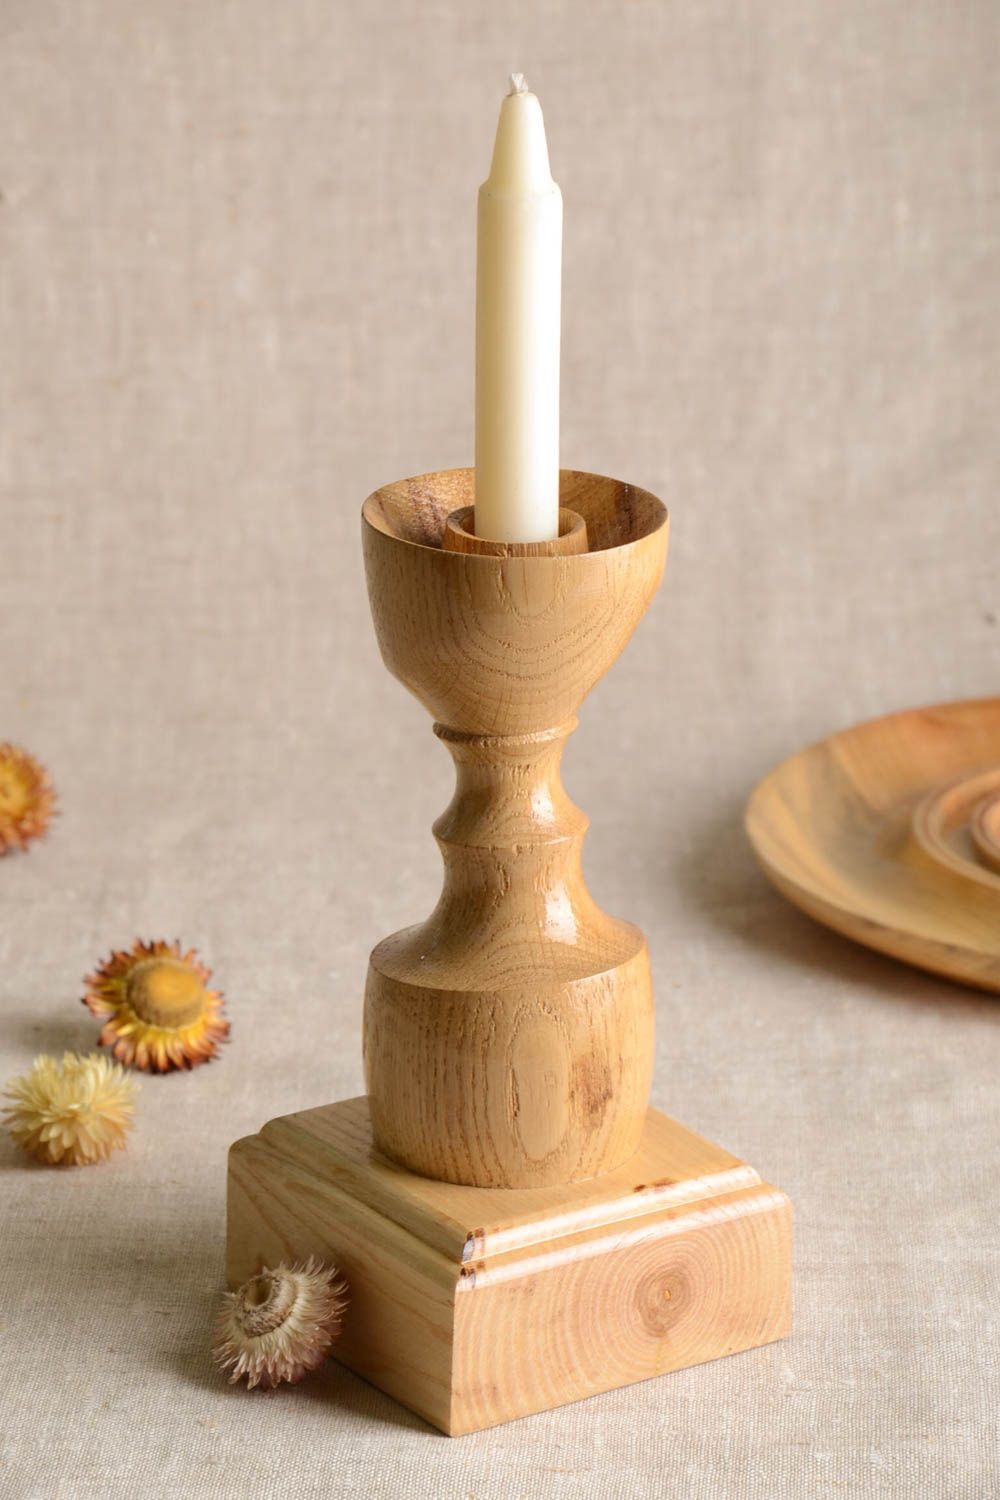 Wooden handmade single candlestick holder 8,27 inches, 1,28 lb photo 1